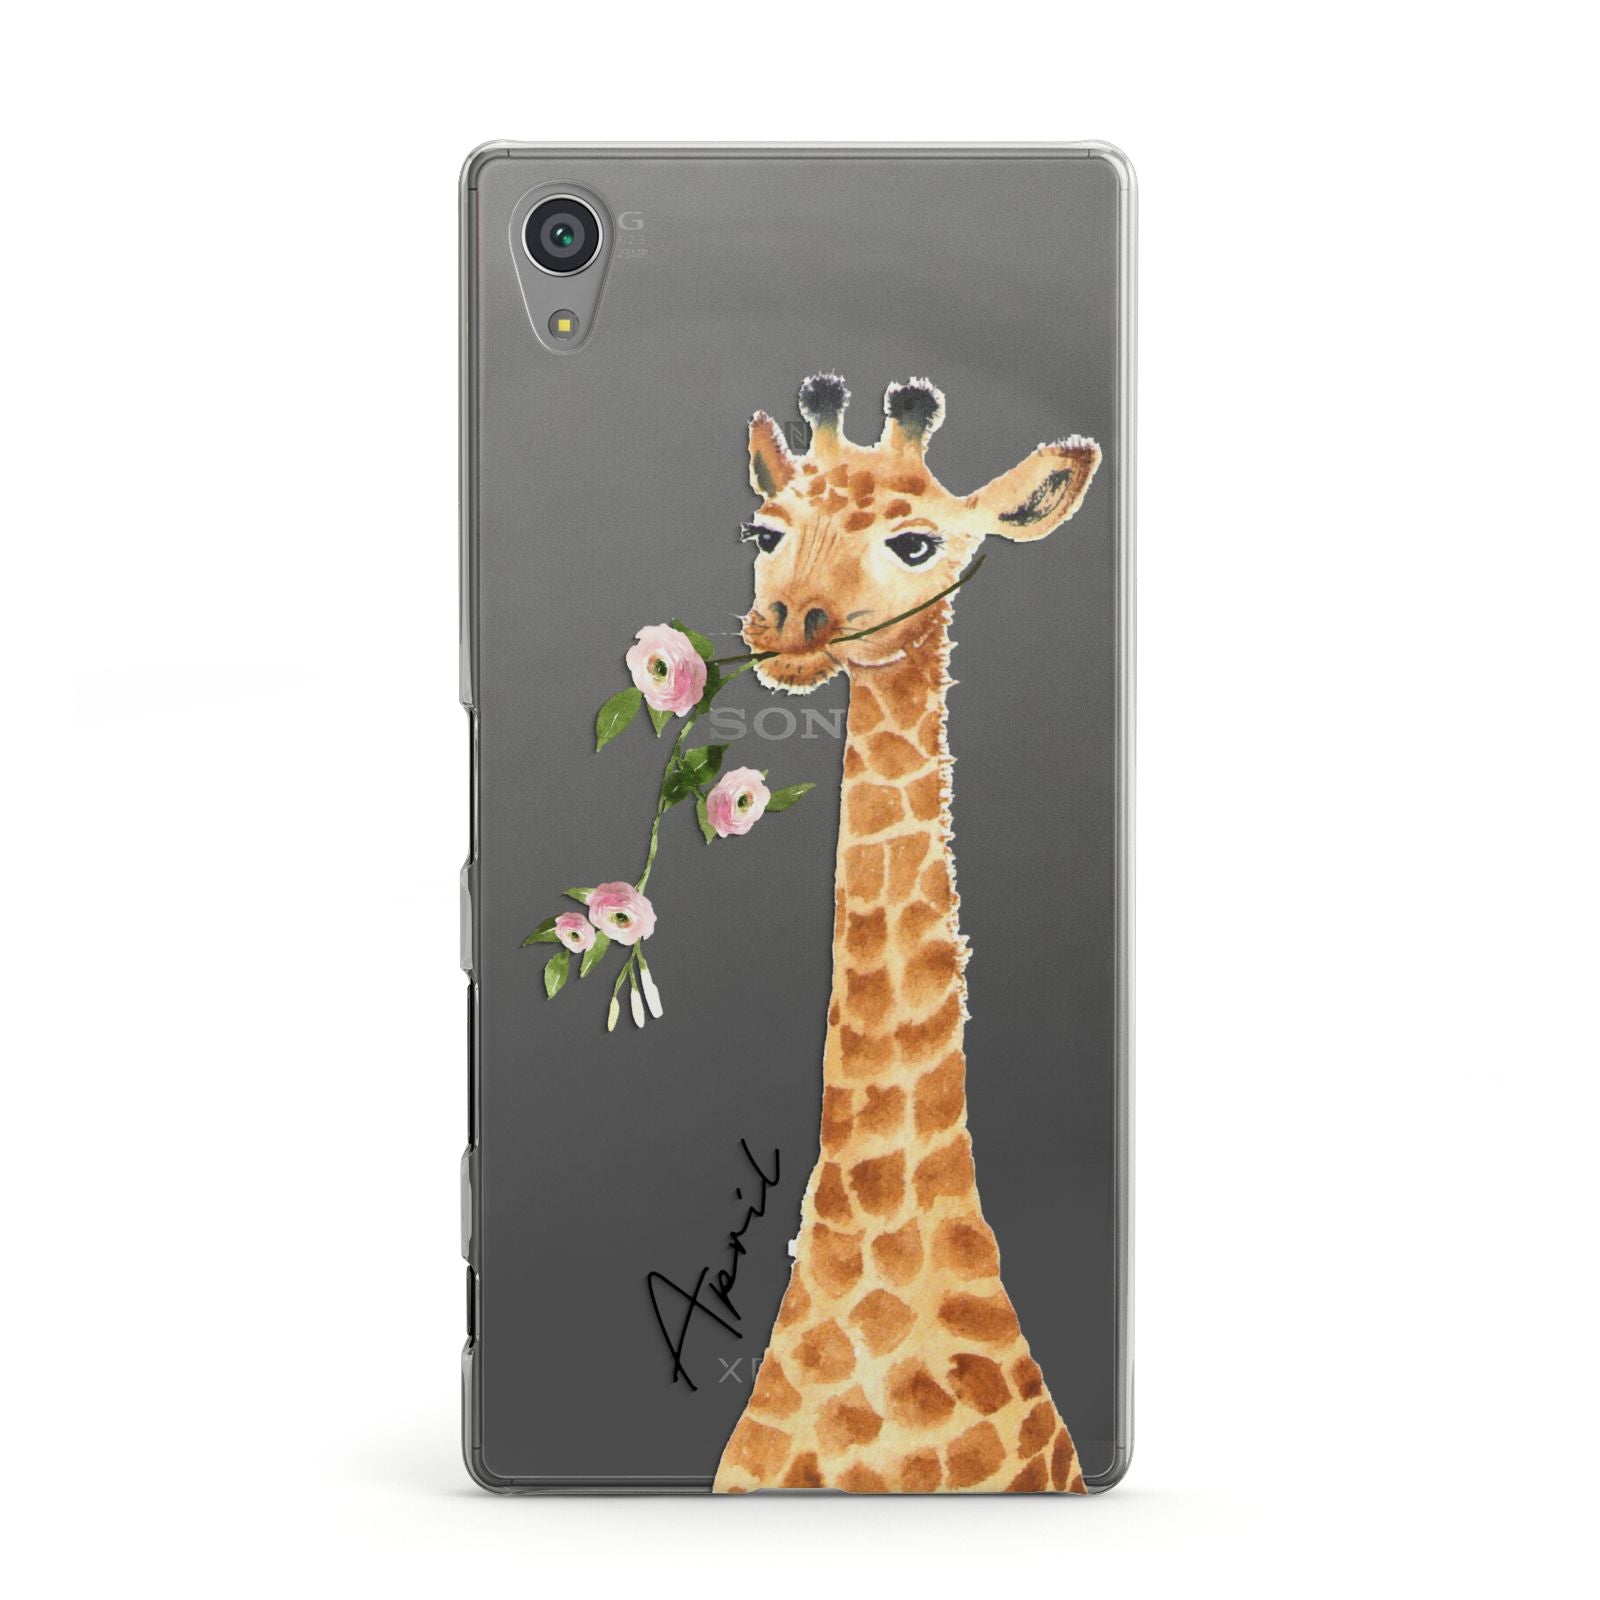 Personalised Giraffe with Name Sony Xperia Case